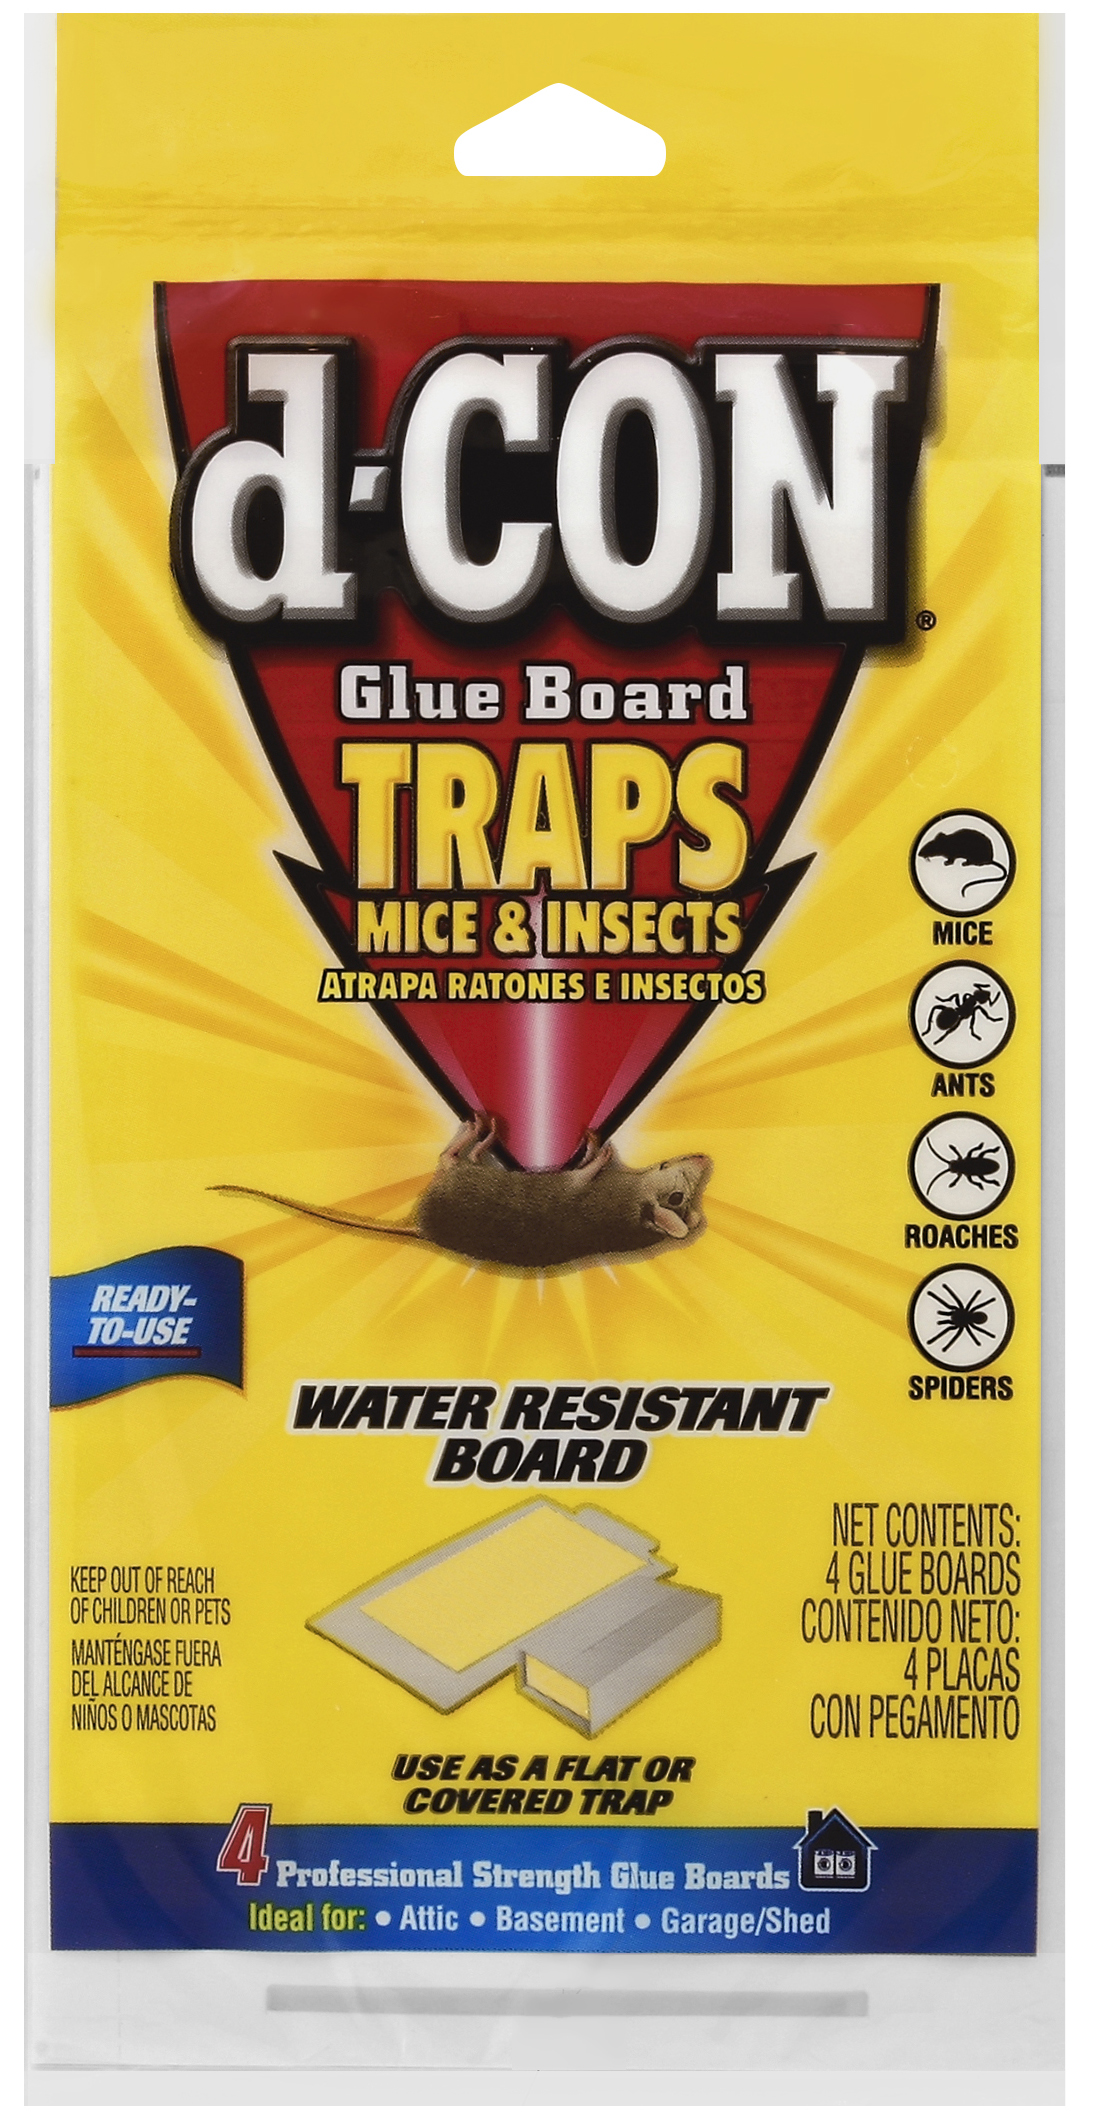 dCON Glue Board Traps Mice  Insects